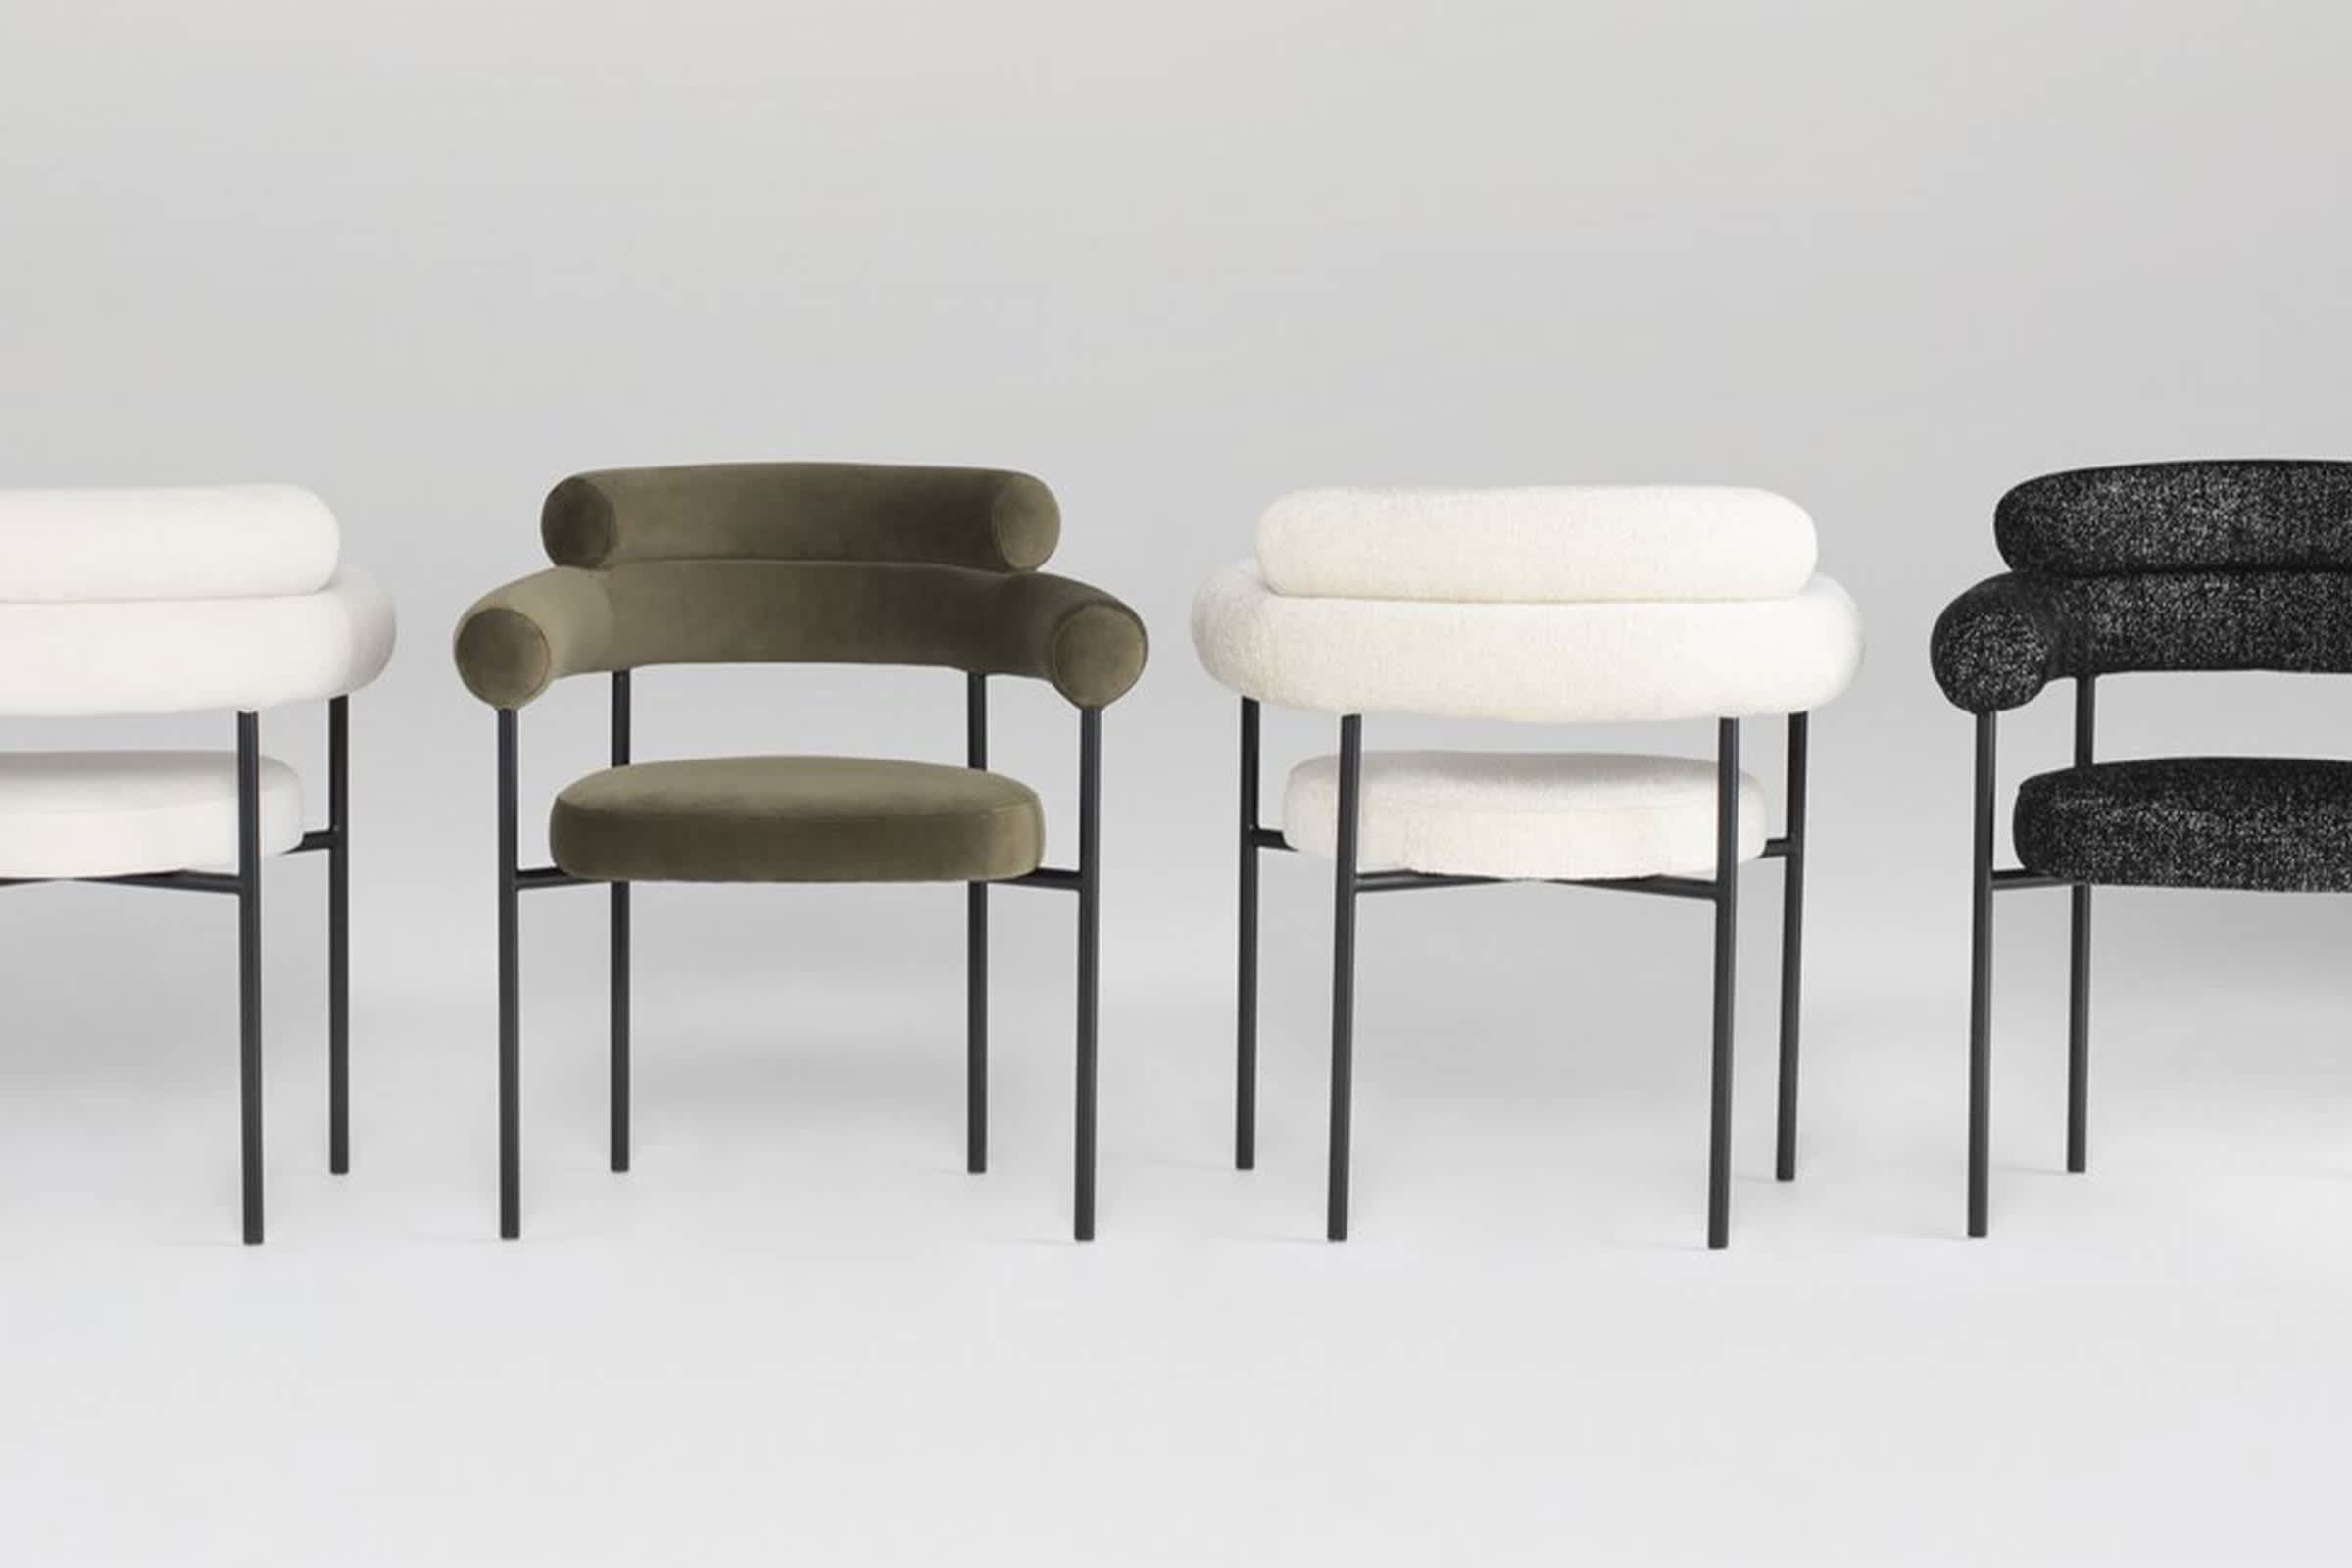 Chair by Nuevo Furniture in assorted colors